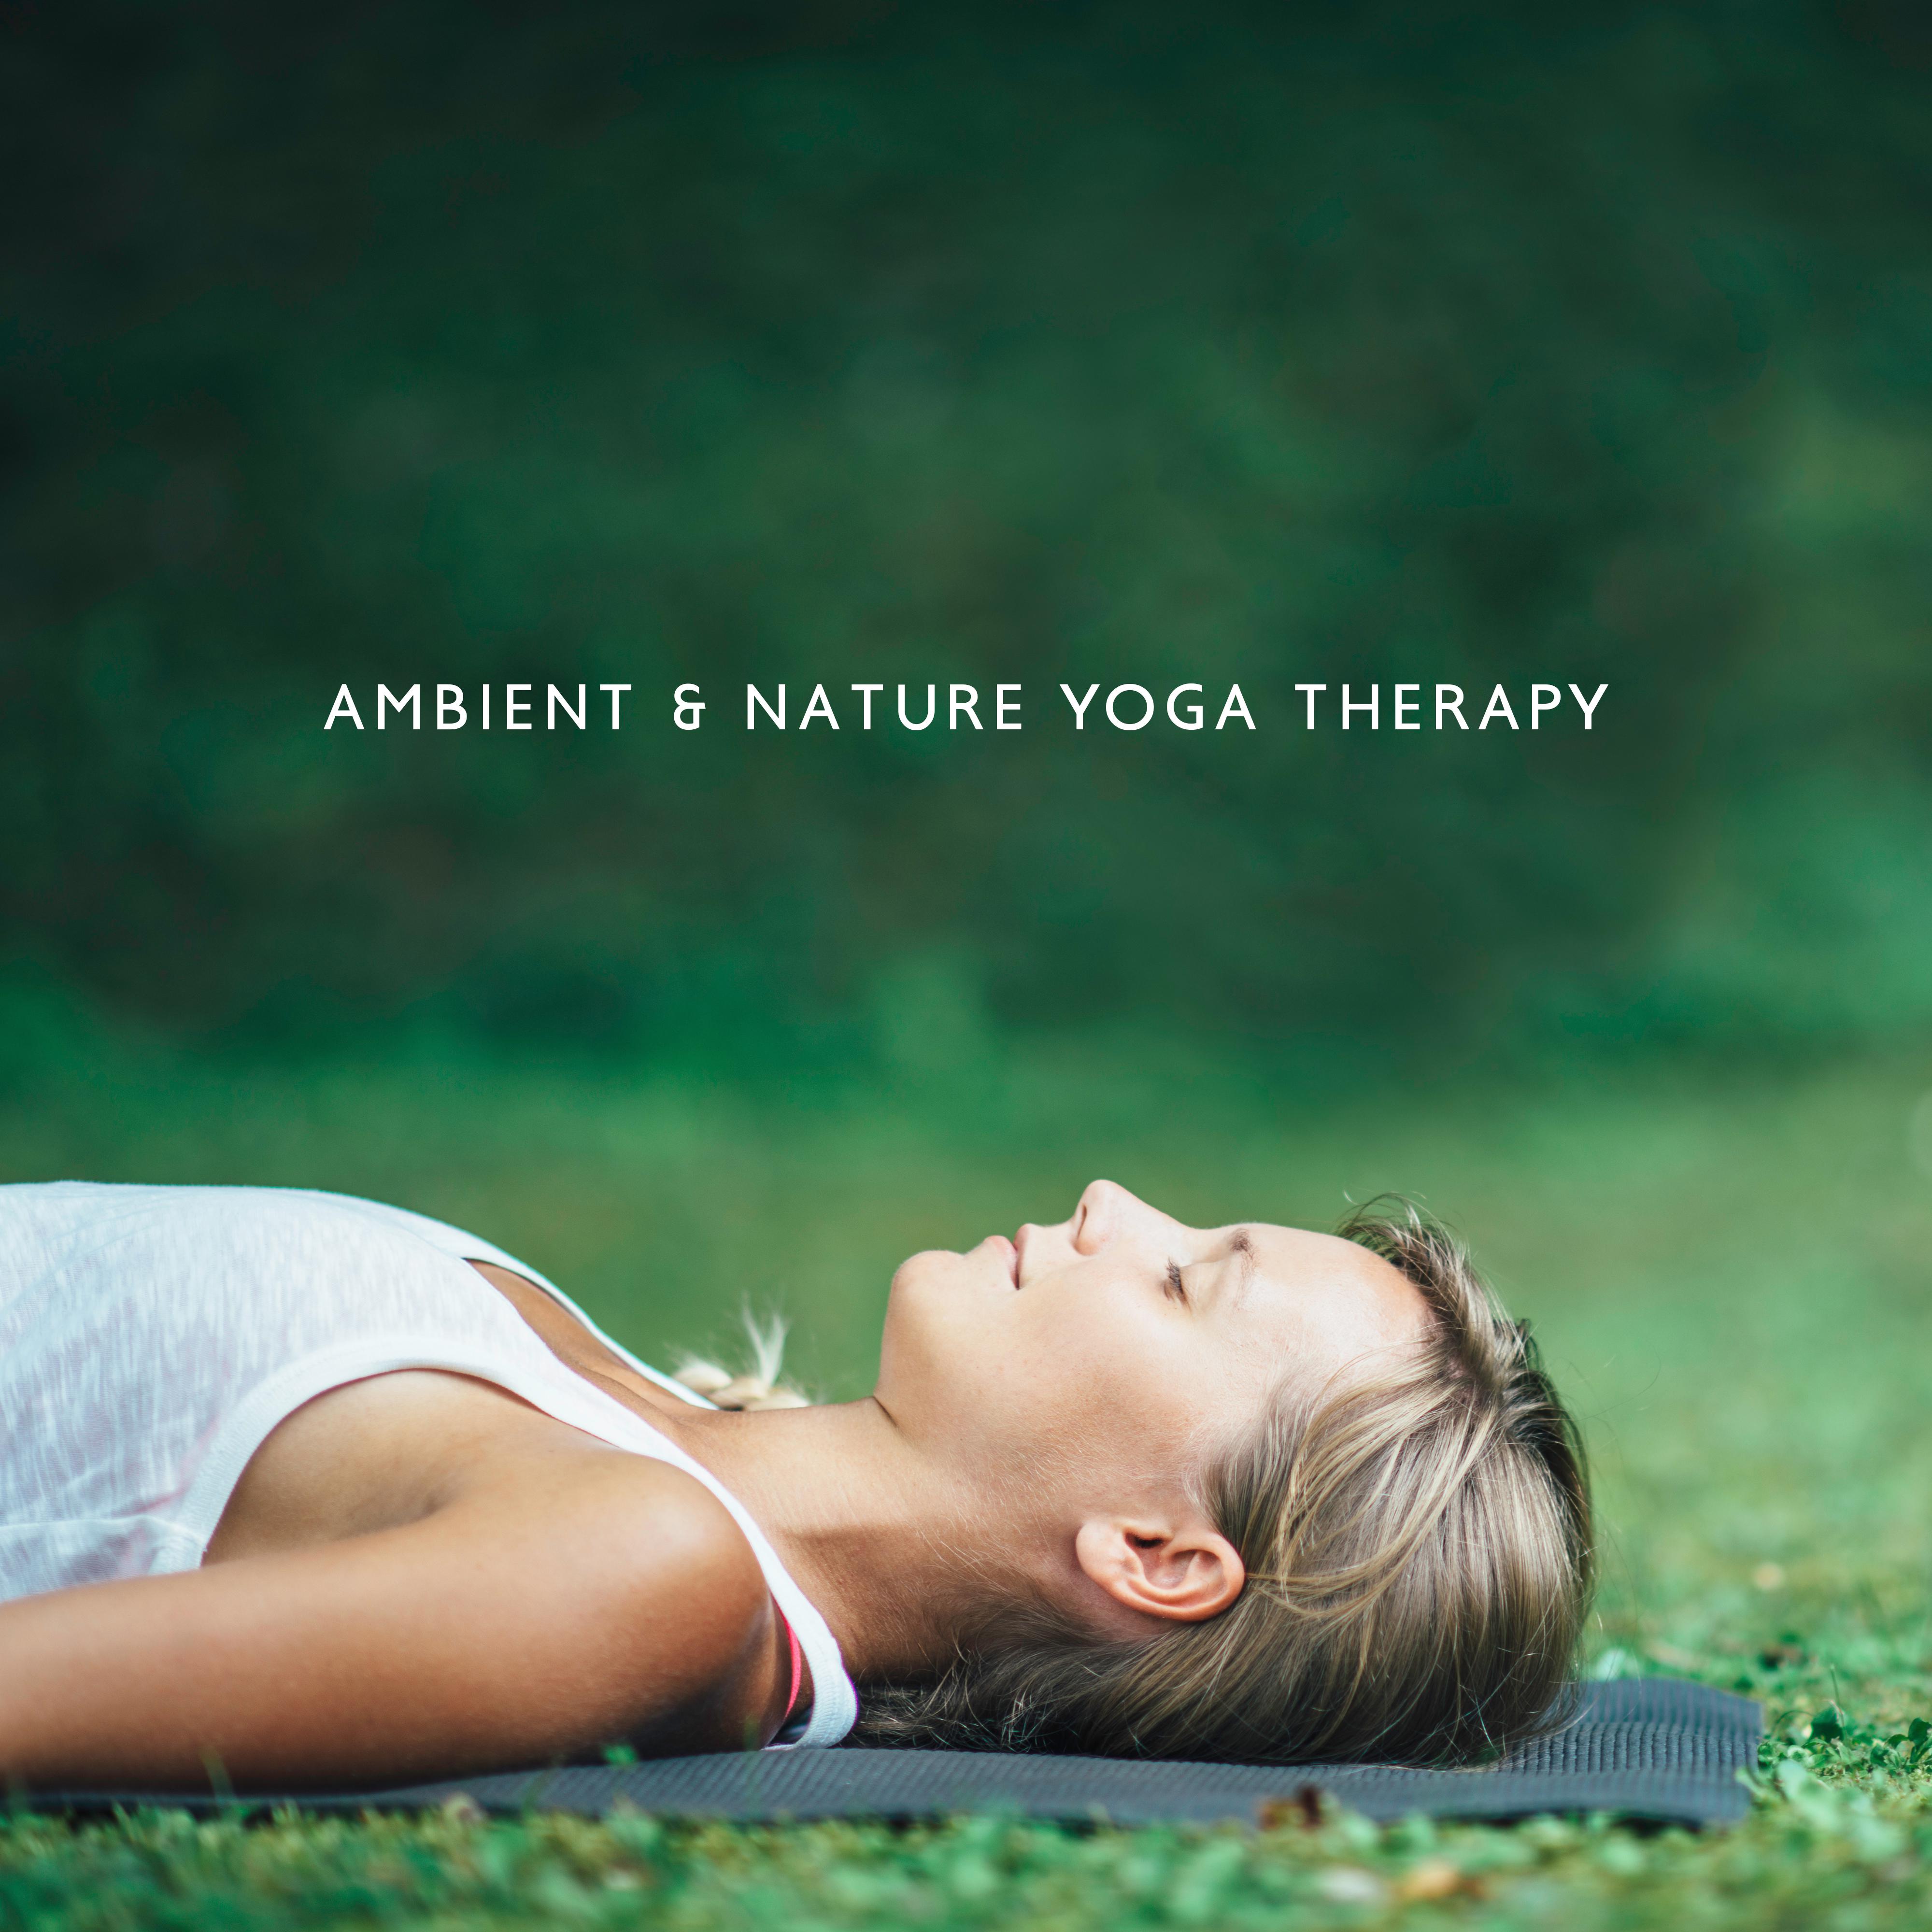 Ambient & Nature Yoga Therapy: 2019 New Age Music for Meditation & Deep Relaxation